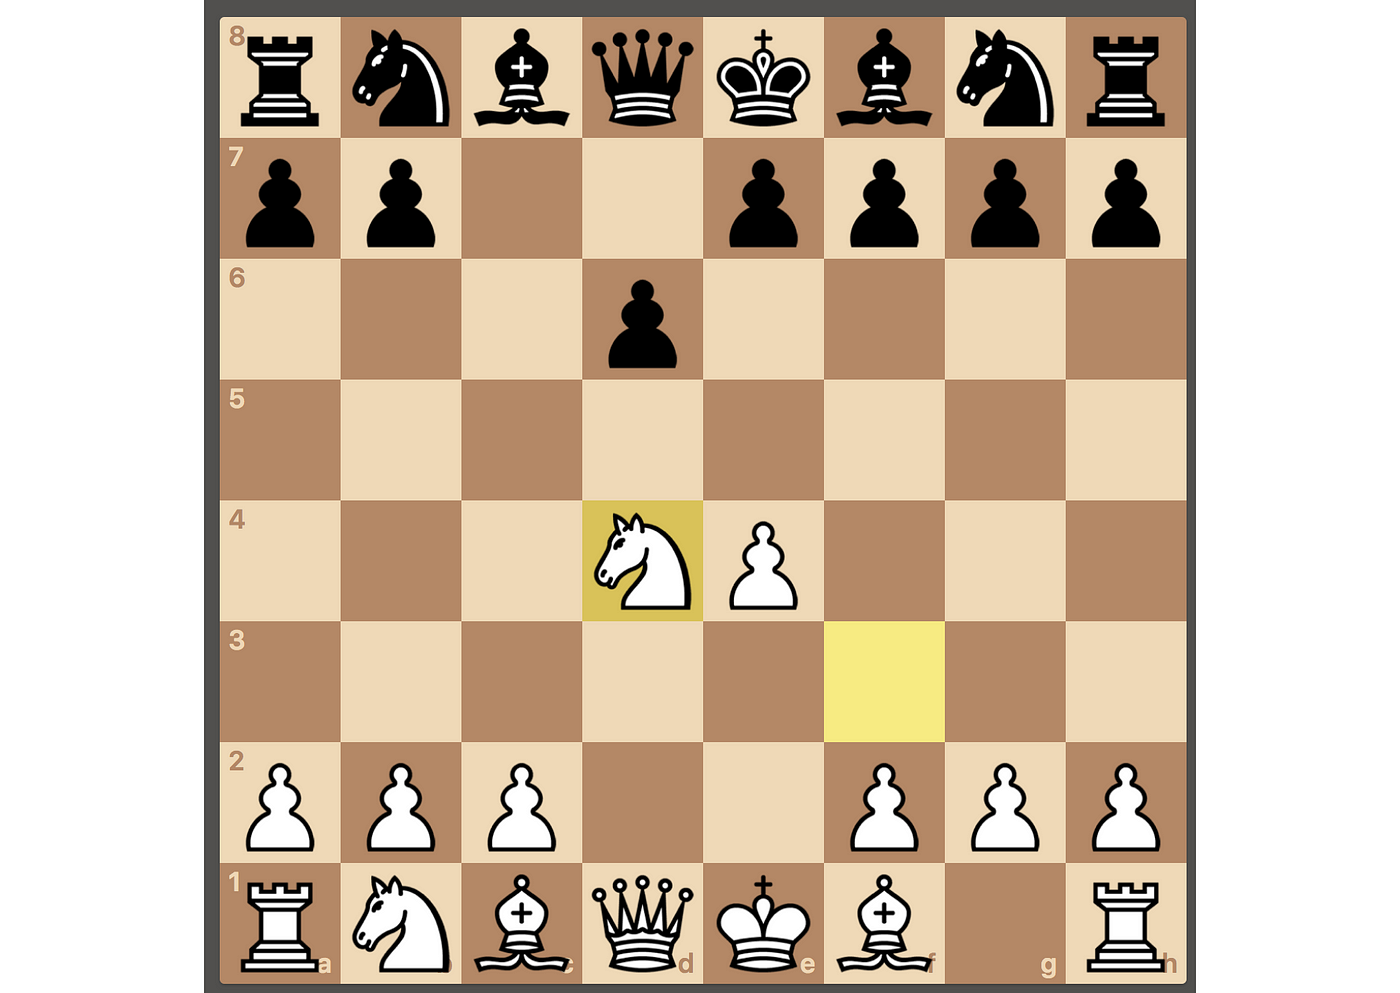 Hypothesis Testing on Chess Openings